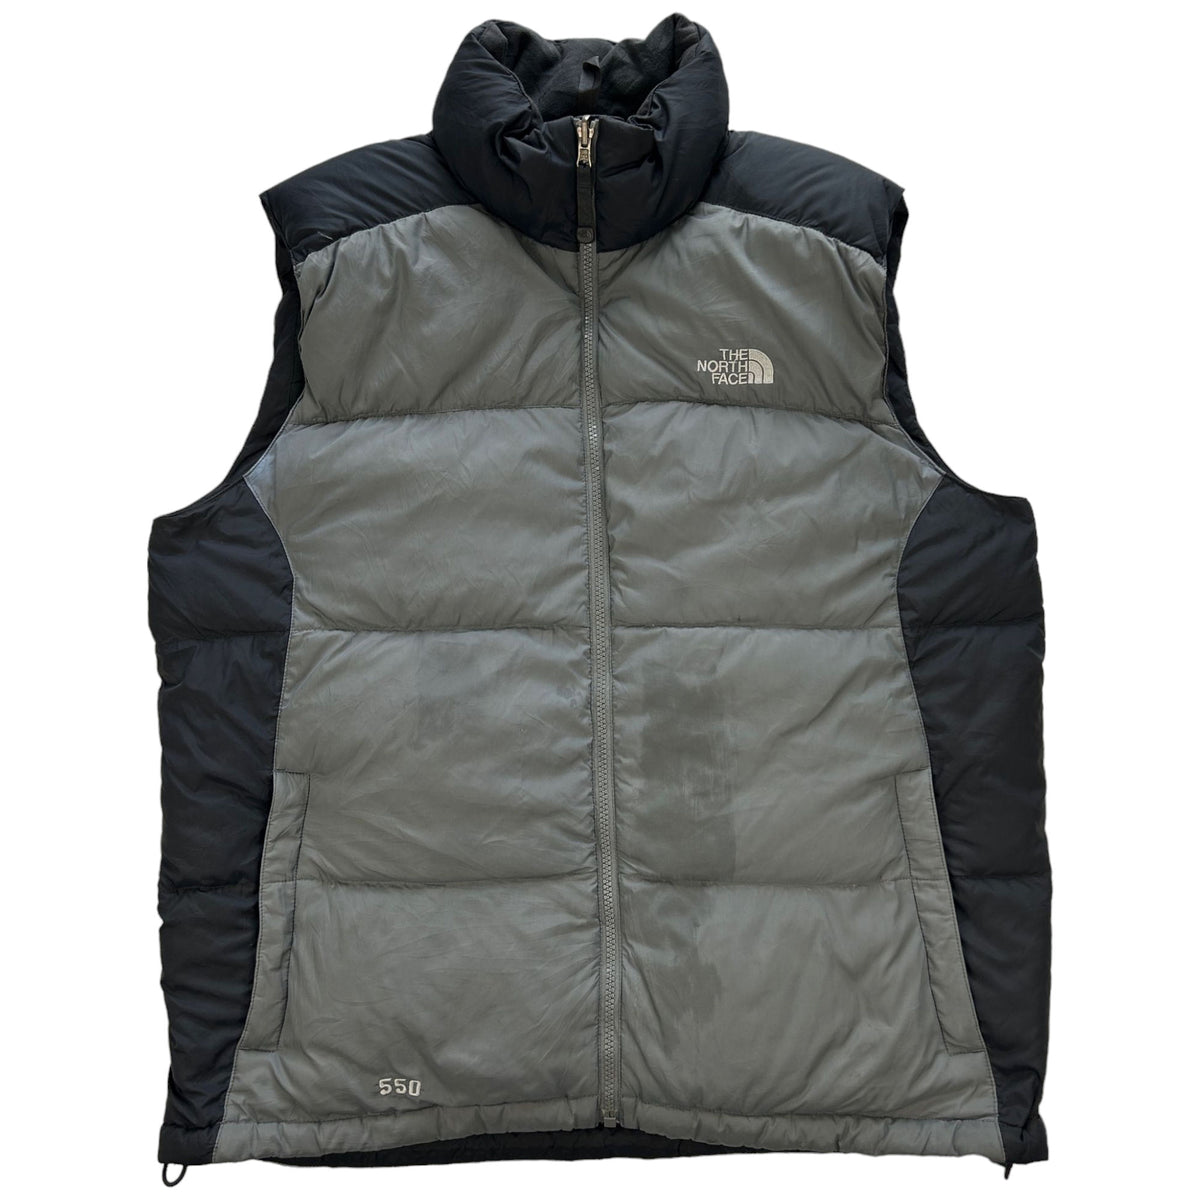 Vintage The North Face Puffa Gilet Size L